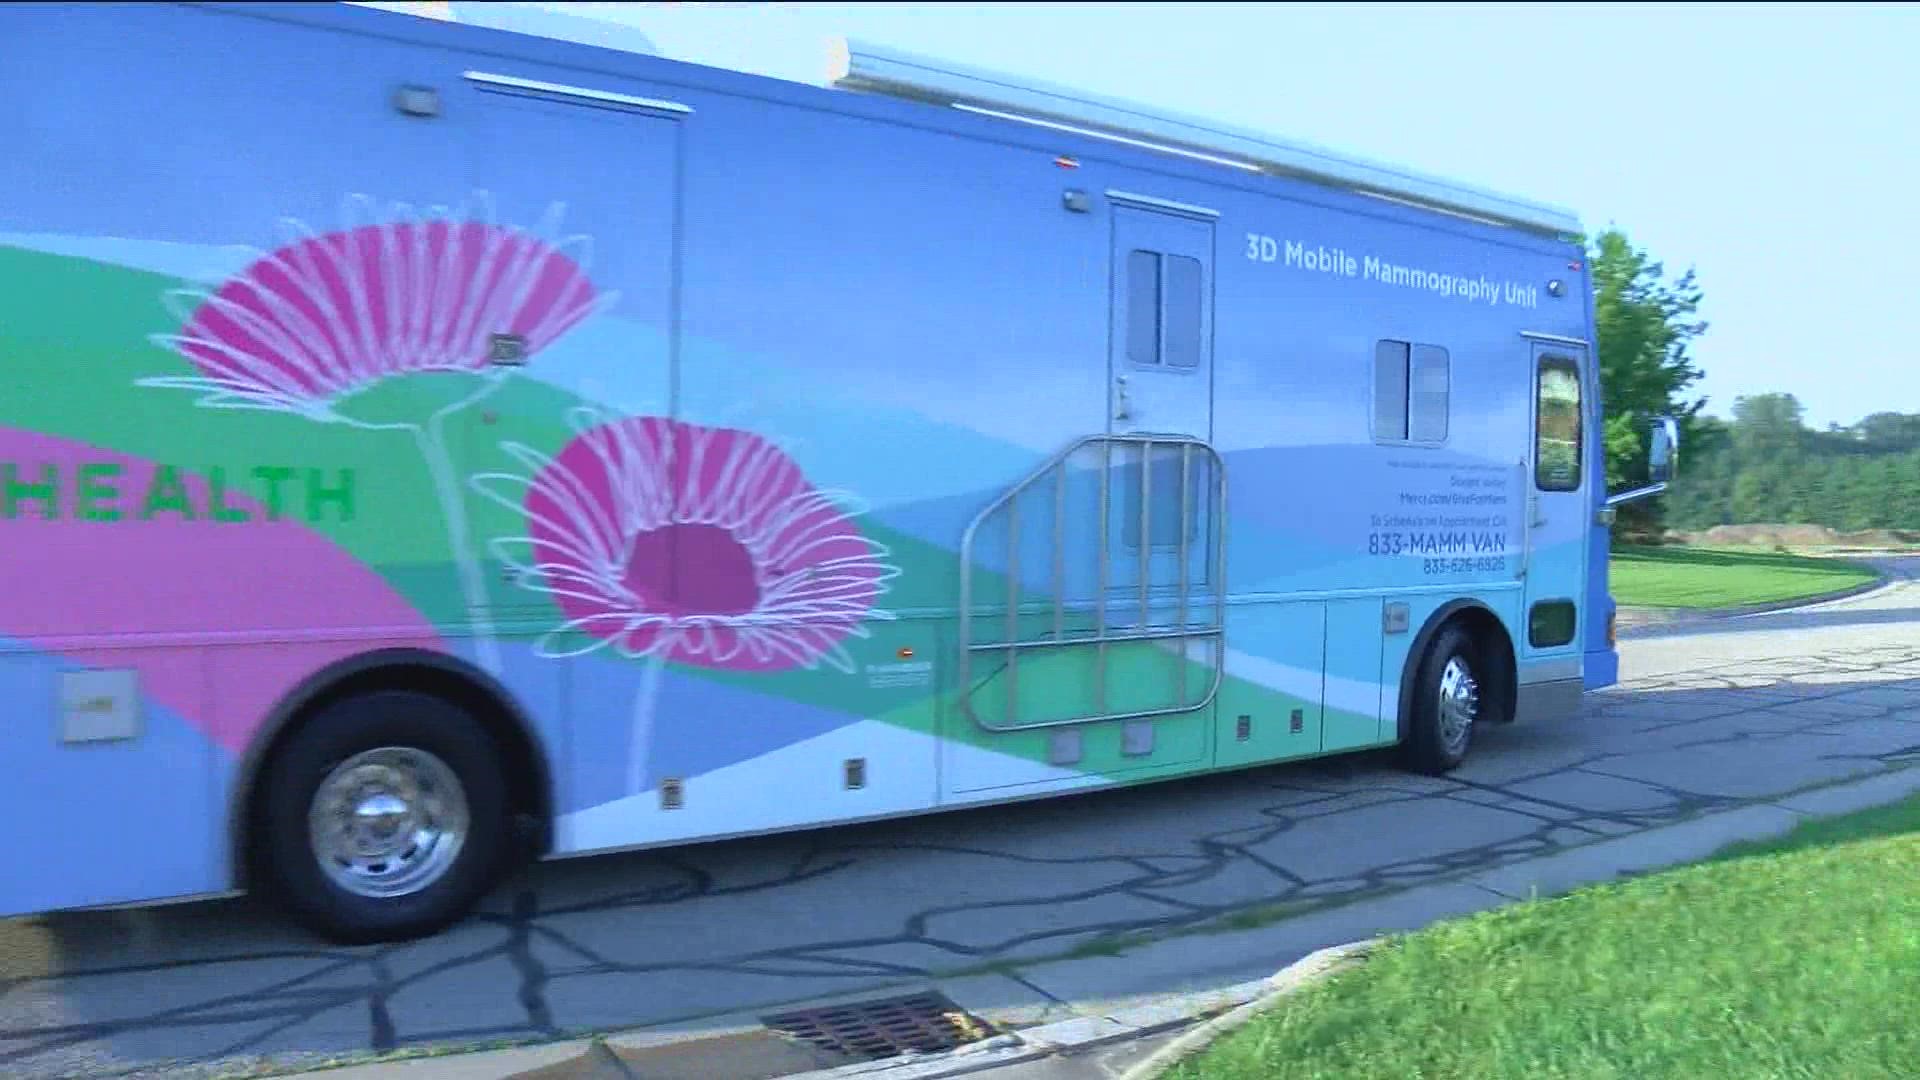 The Mercy 3D Mobile Mammography Unit helps alleviate many of the difficulties faced when seeking preventative care.